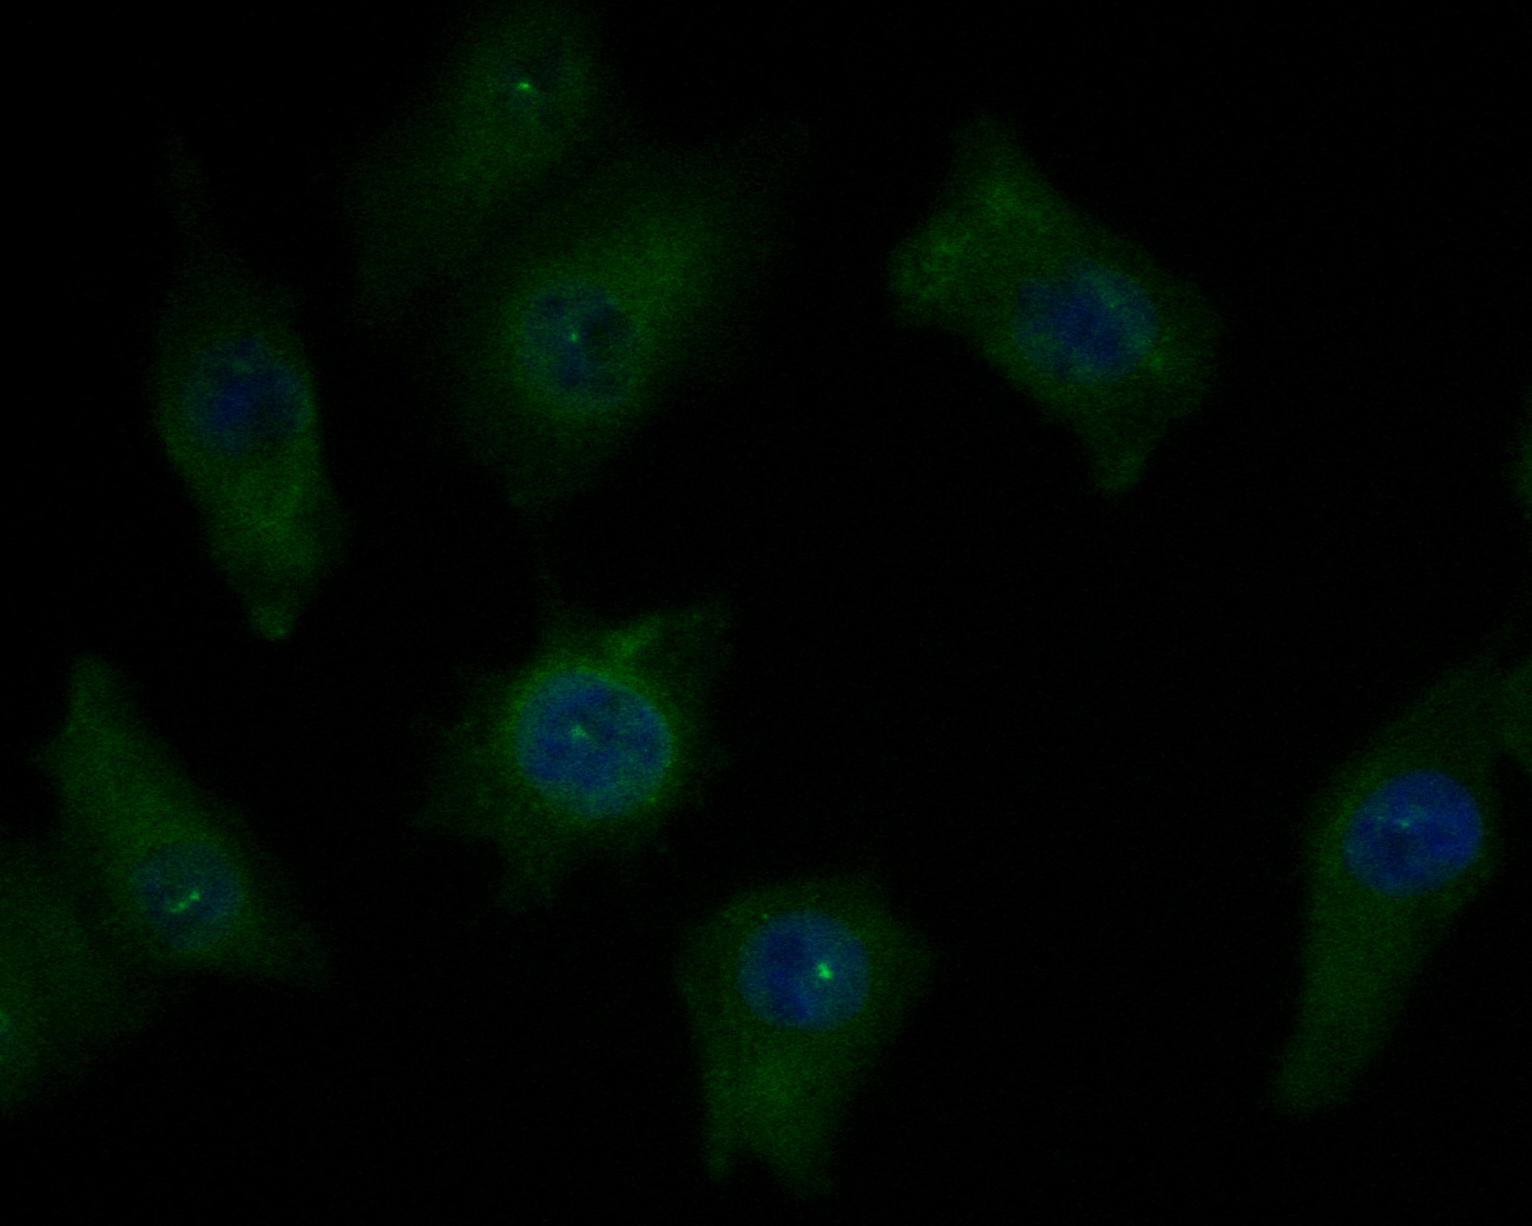 ICC staining of CHRNB2 in A549 cells (green). Formalin fixed cells were permeabilized with 0.1% Triton X-100 in TBS for 10 minutes at room temperature and blocked with 1% Blocker BSA for 15 minutes at room temperature. Cells were probed with the primary antibody (ER1902-95, 1/50) for 1 hour at room temperature, washed with PBS. Alexa Fluor®488 Goat anti-Rabbit IgG was used as the secondary antibody at 1/1,000 dilution. The nuclear counter stain is DAPI (blue).